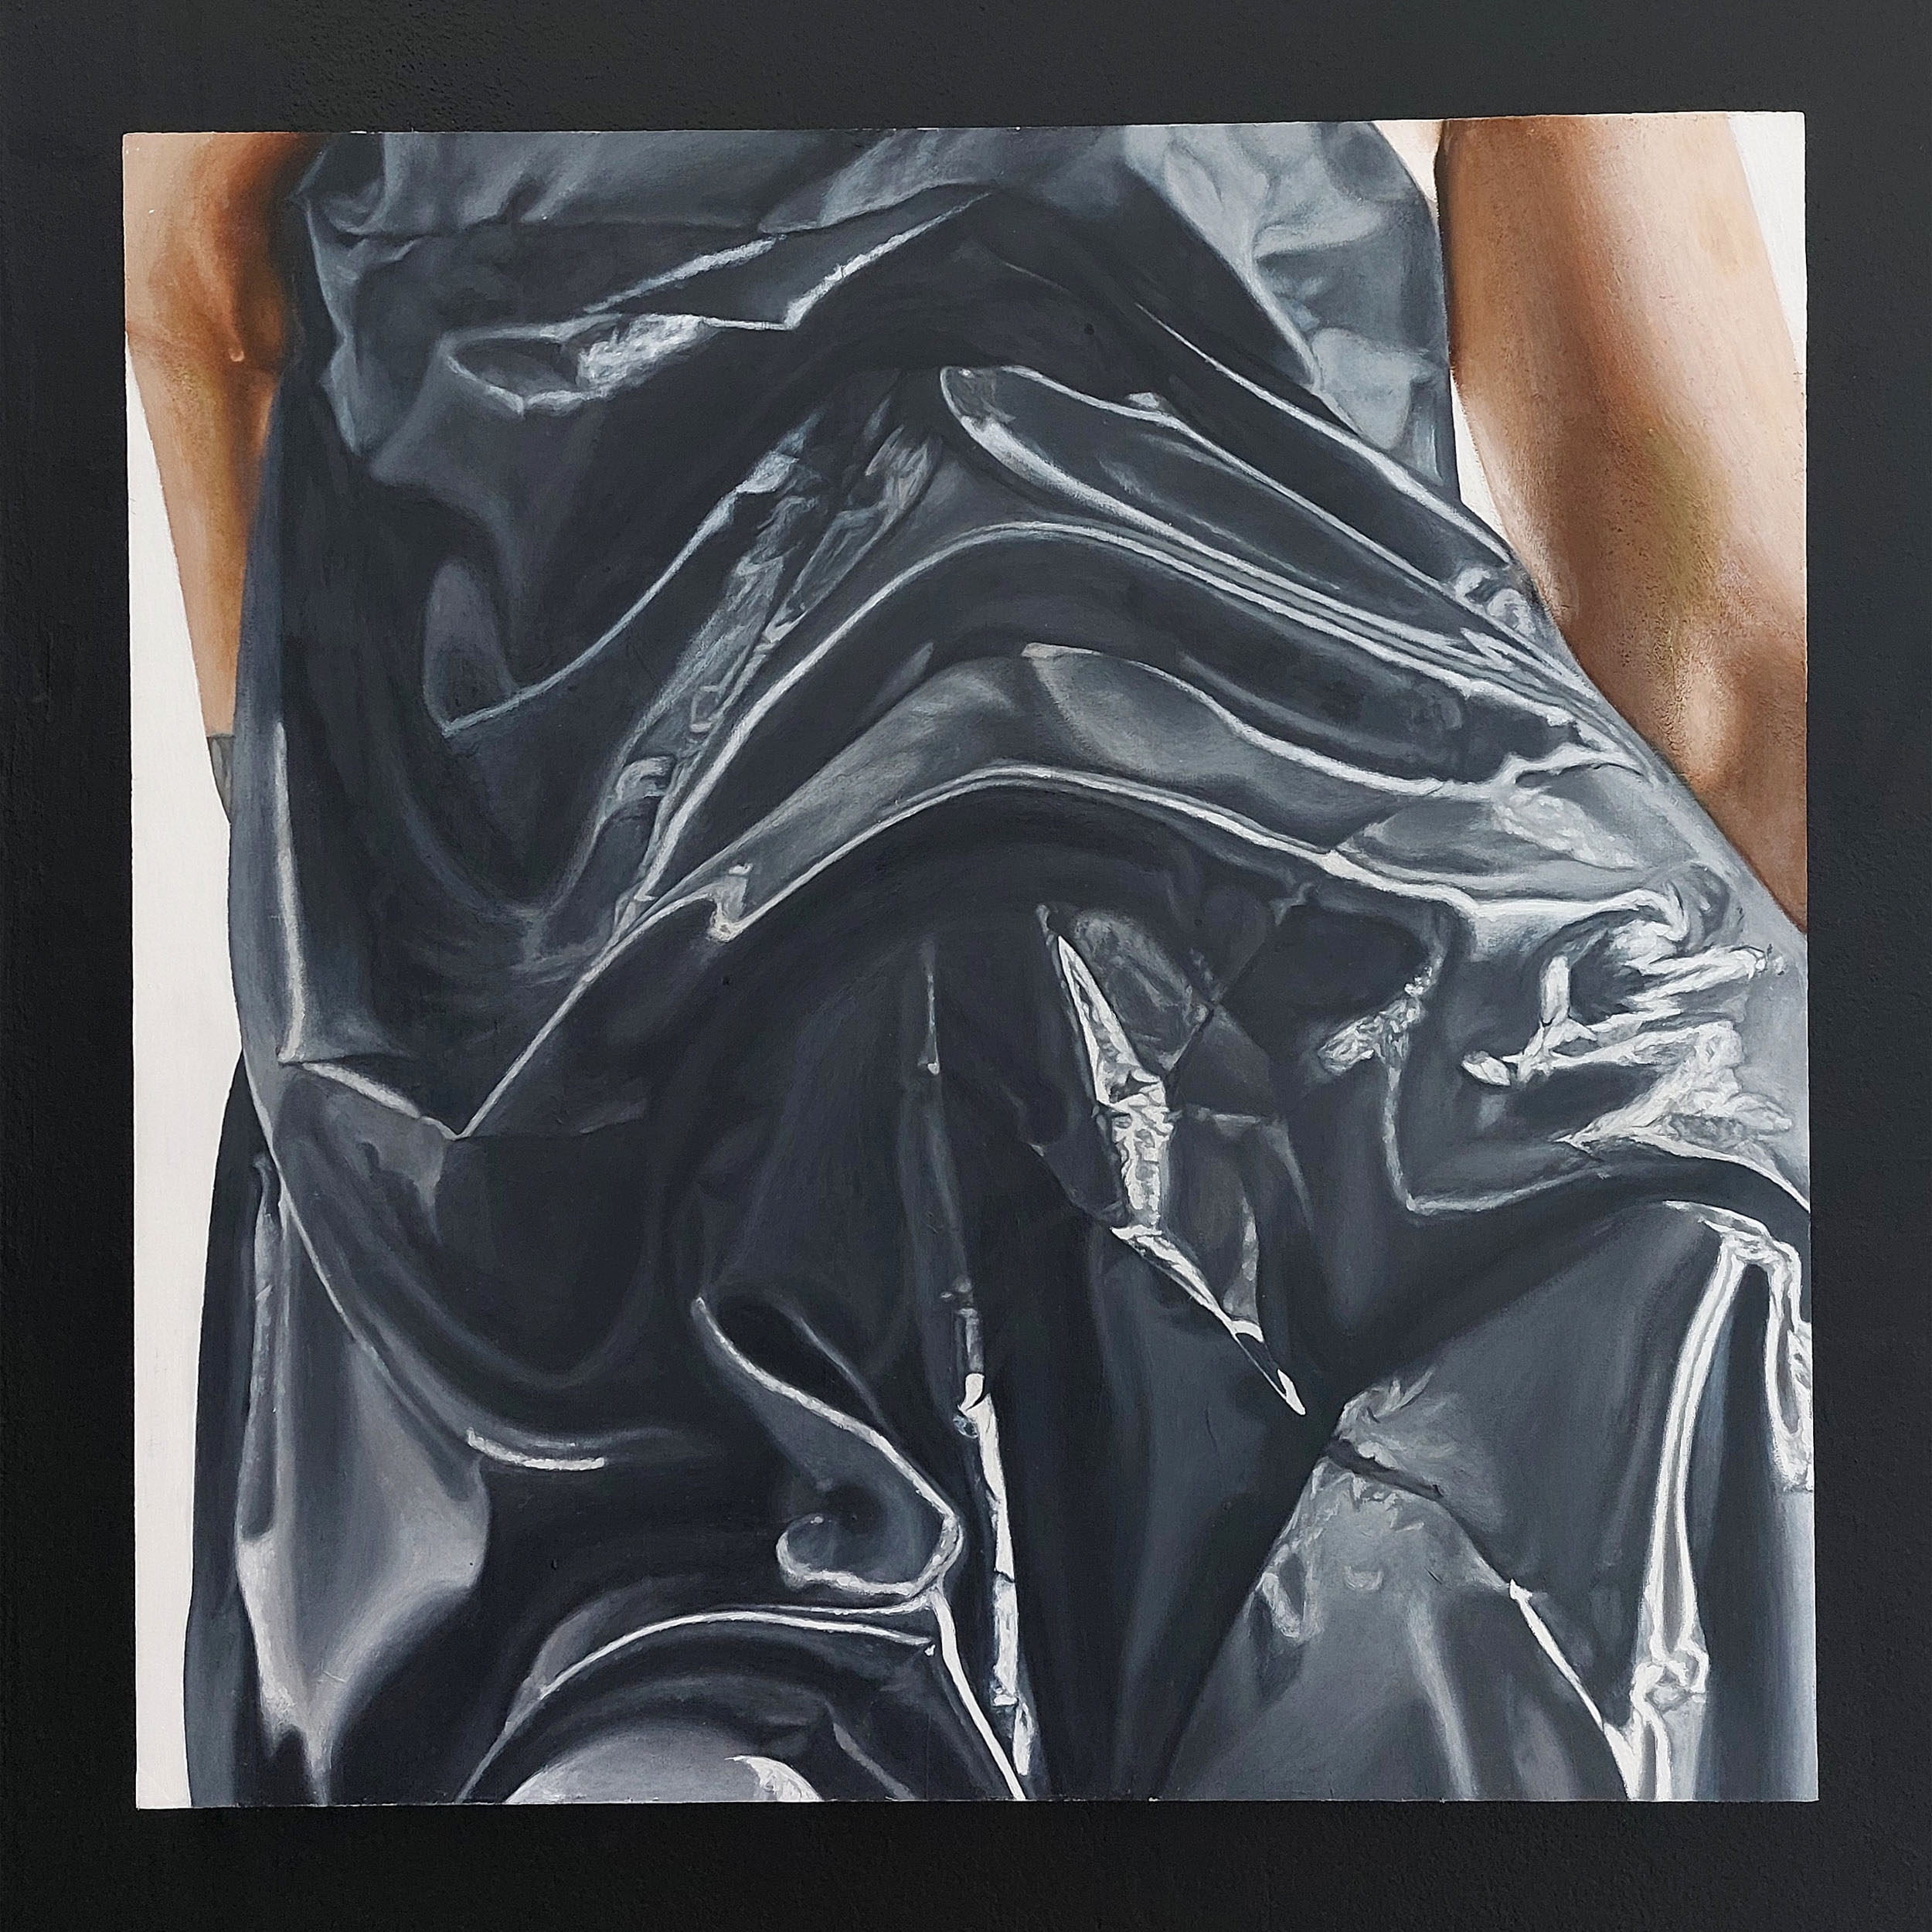 Acrylic painting showing black silk draped over a body.